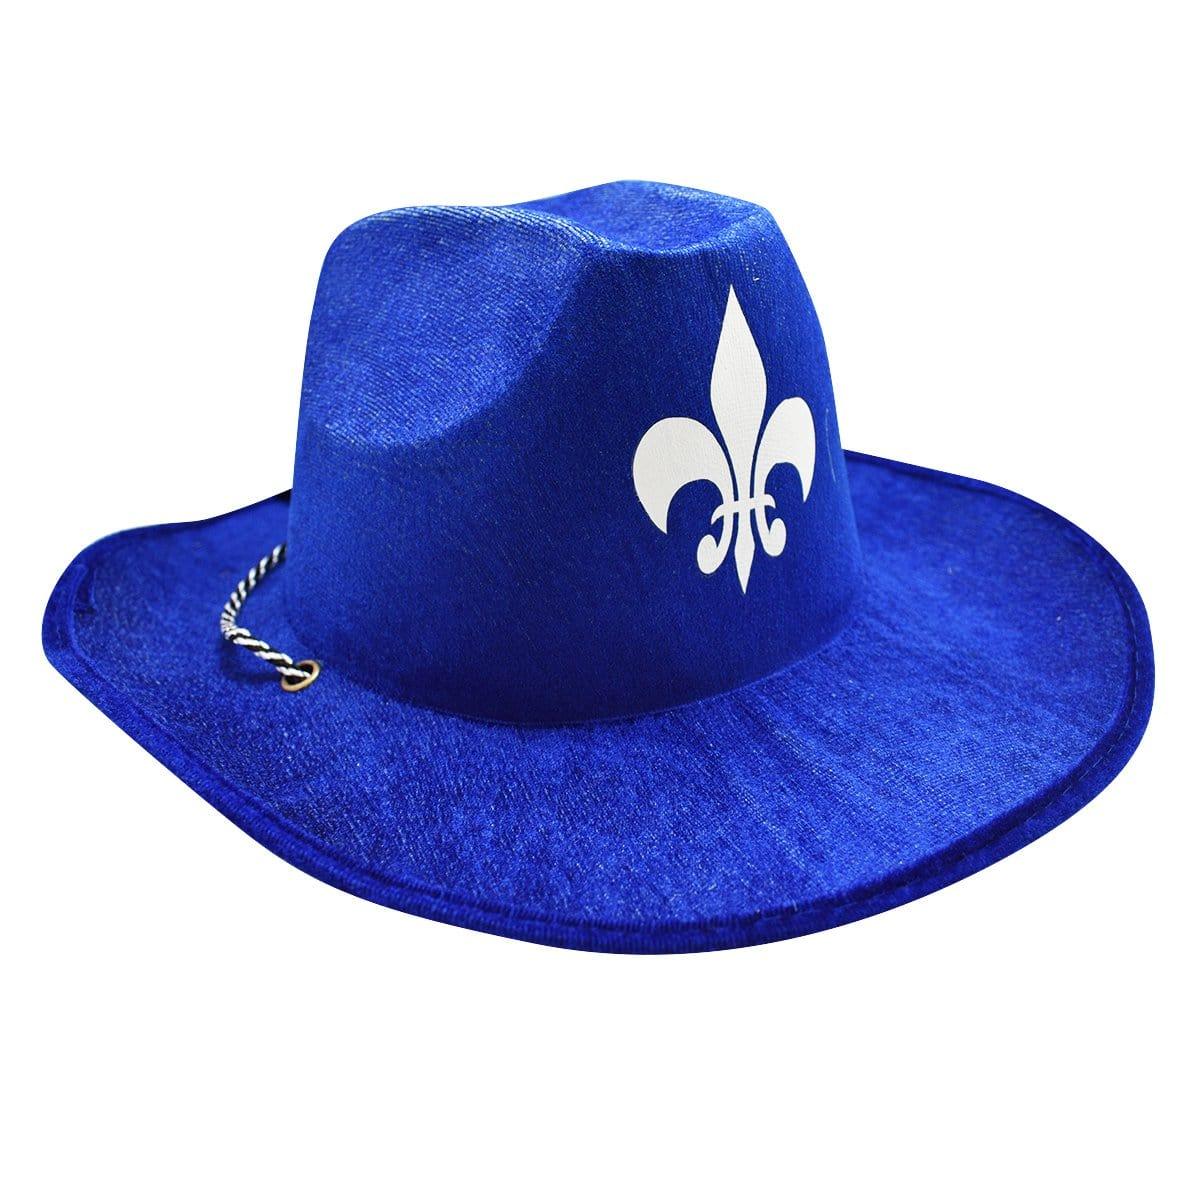 Hats for Men Anxiety Social Awkward Cowboy Hats Blue hat Gifts for